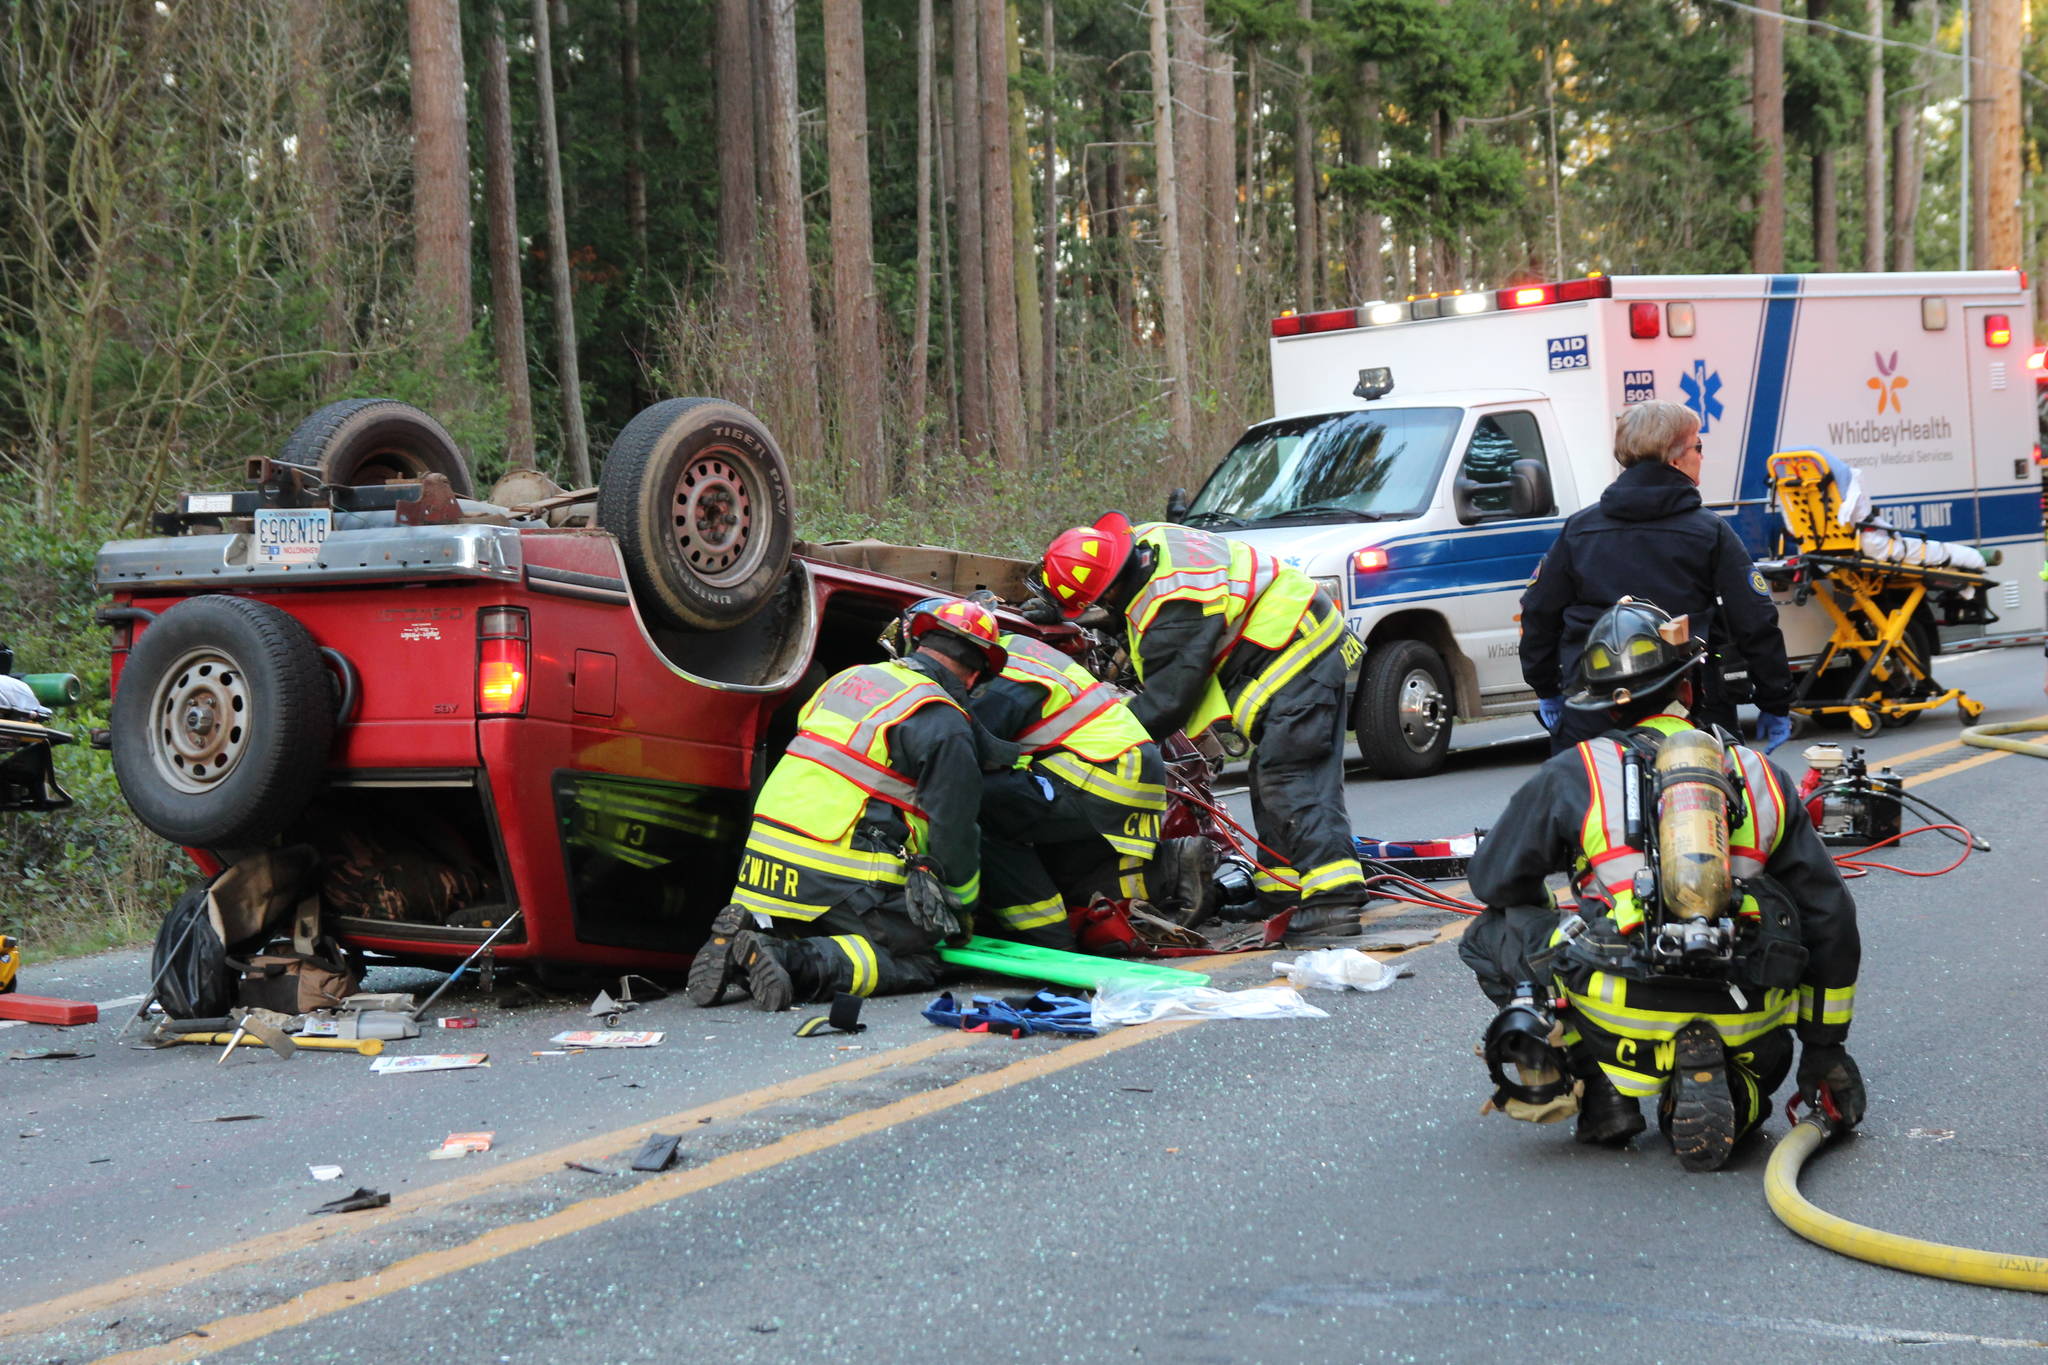 Firefighters work to extract the driver of a vehicle involved in a head-on crash.